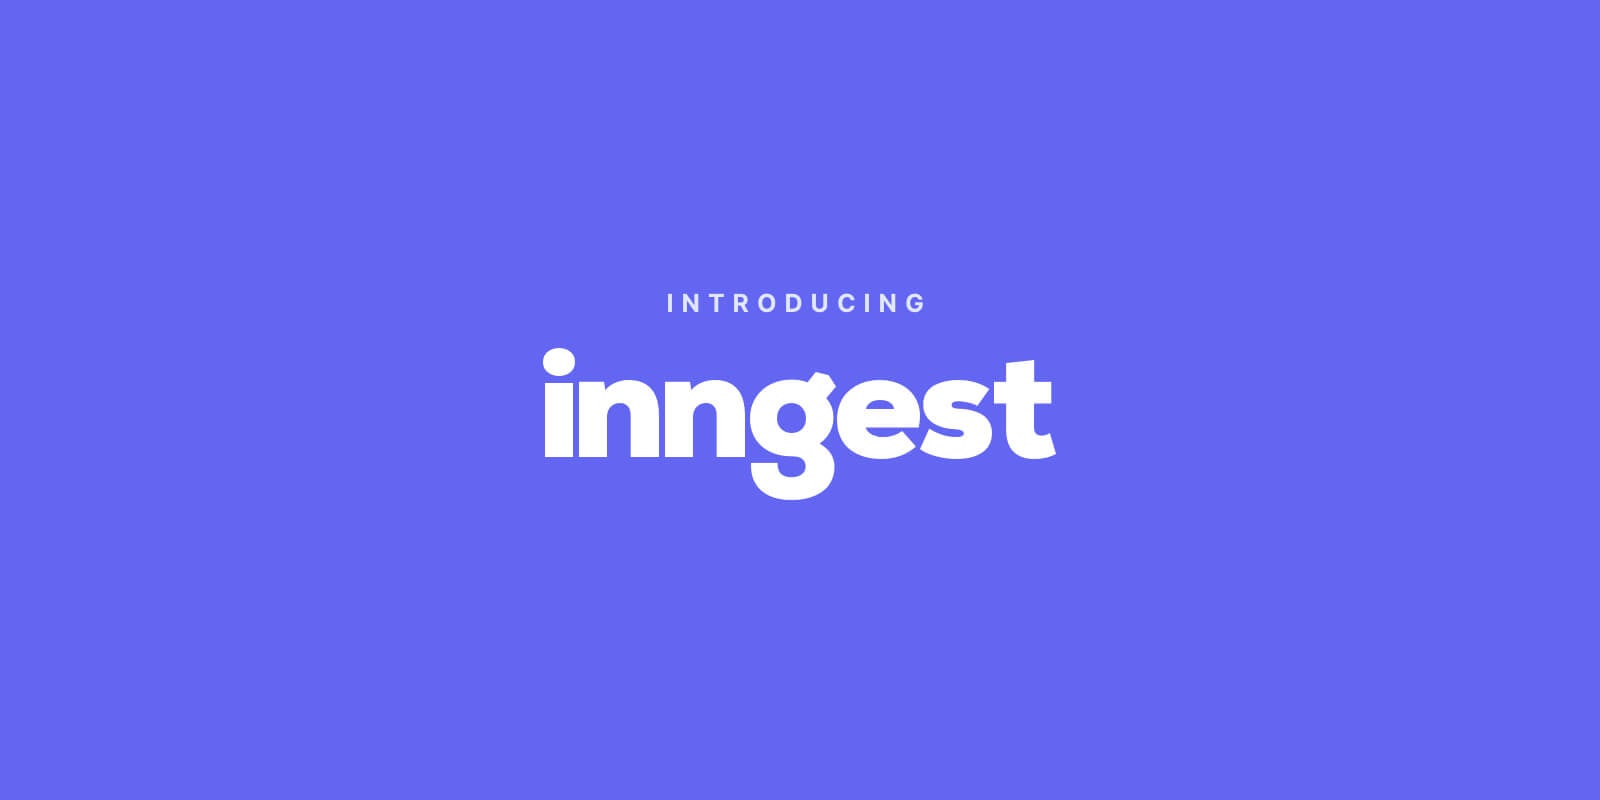 Featured image for Introducing Inngest: an event workflow platform blog post